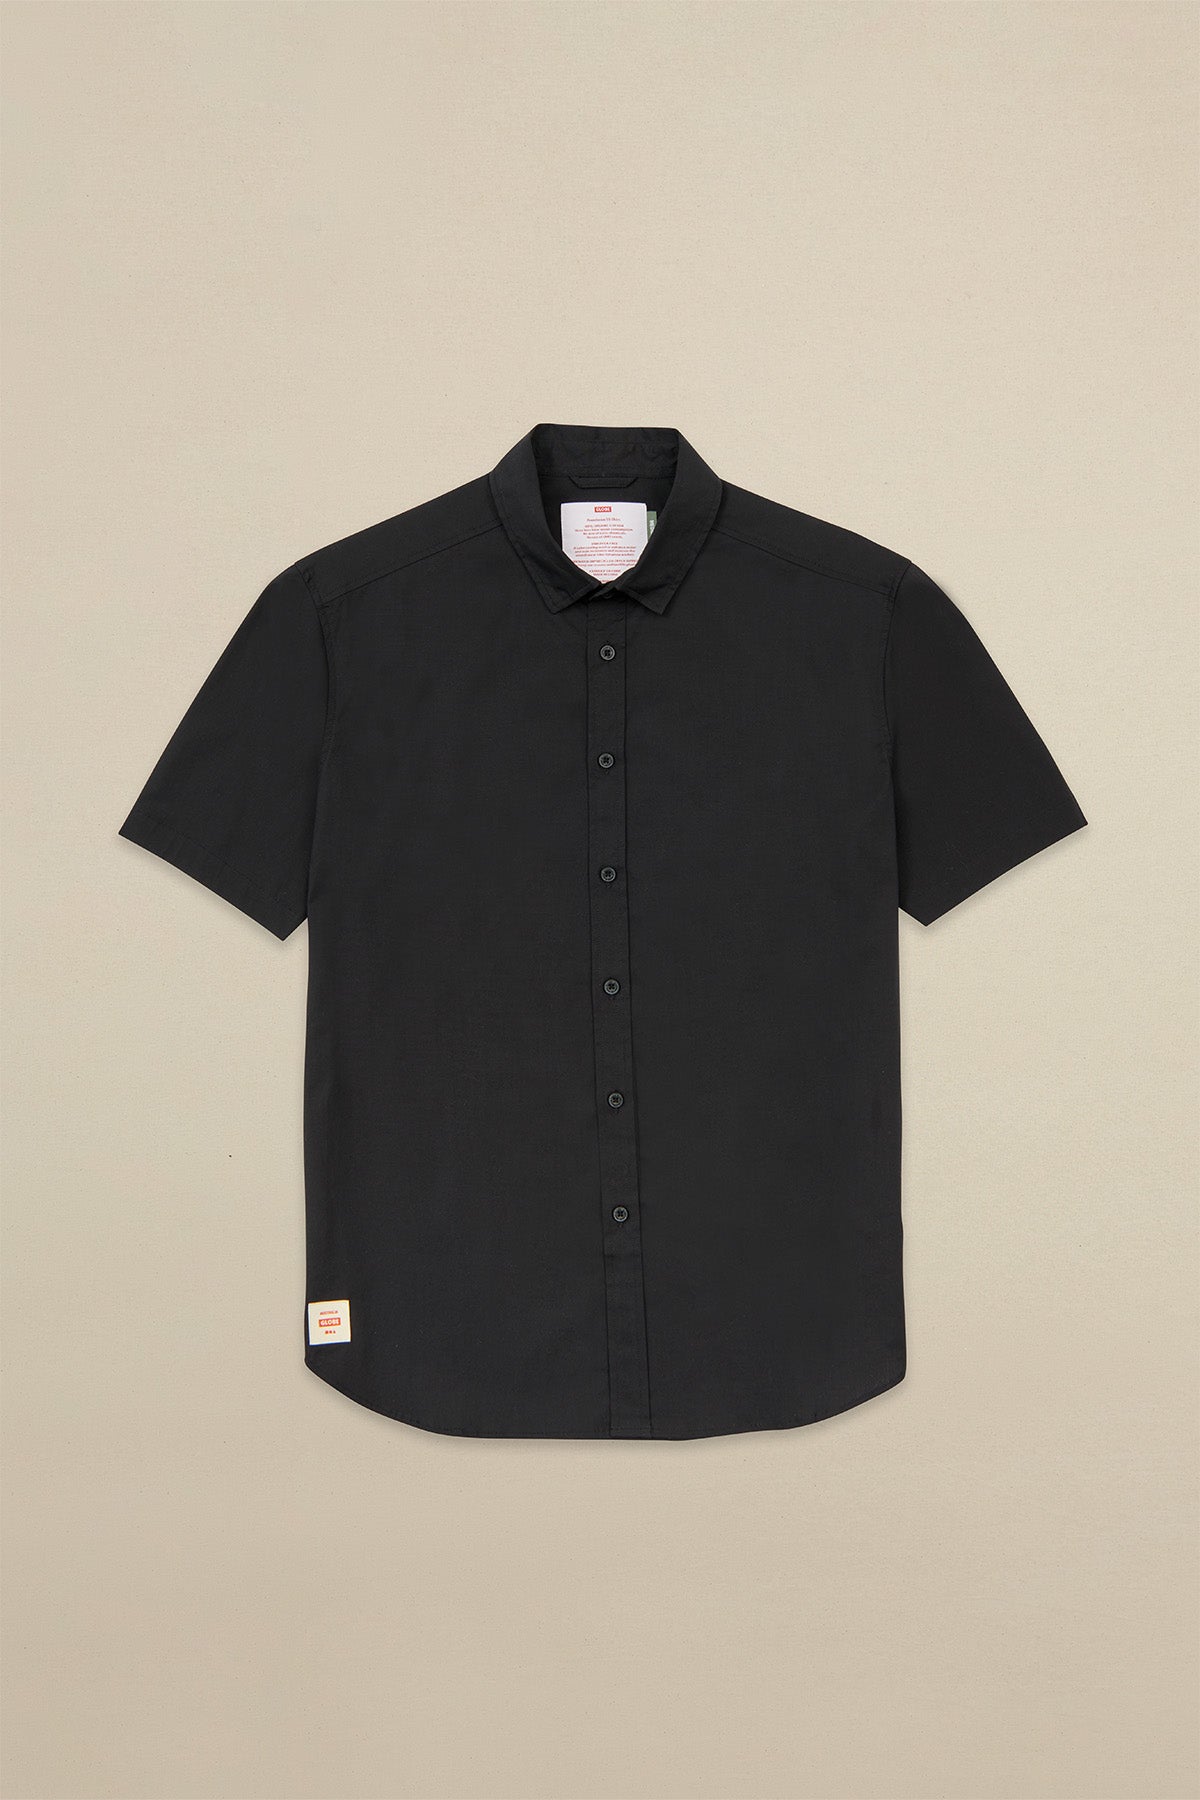 off body front view of Foundation S/S Shirt - black